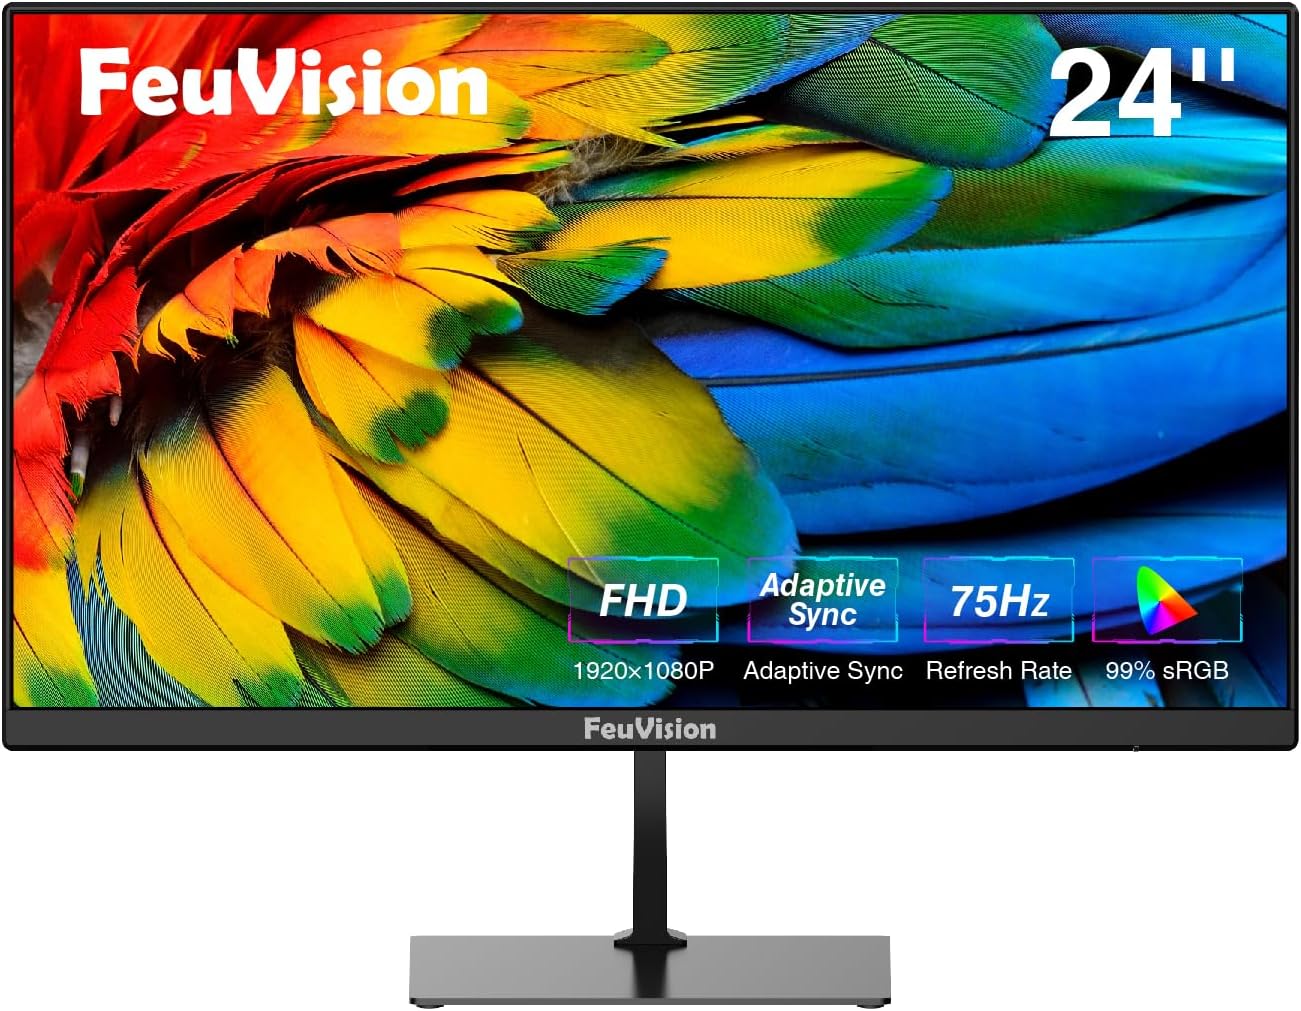 FeuVision 24 inch Monitor 1080p FHD, 100Hz, IPS Panel, Gaming  Office Computer Monitor, 3-Sided Frameless  Ultra Slim, VESA Mountable, 99% sRGB, Adaptive Sync, HDMI  VGA, Built-in Speakers